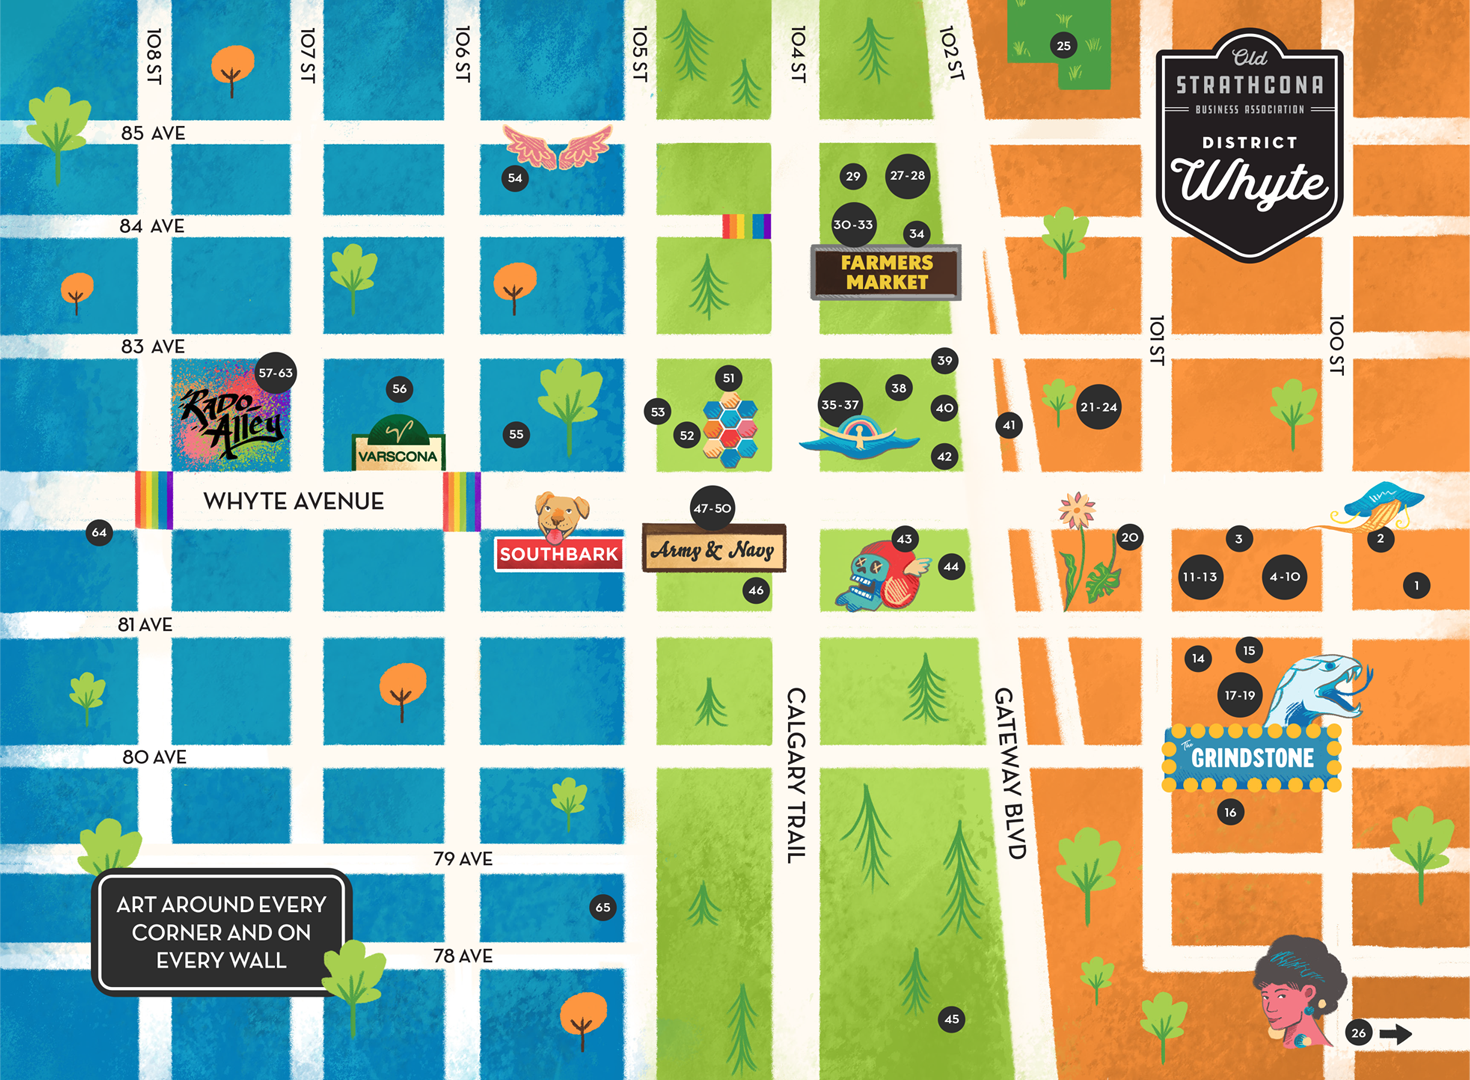 District Whyte Mural Map - Old Strathcona Business Association, Edmonton